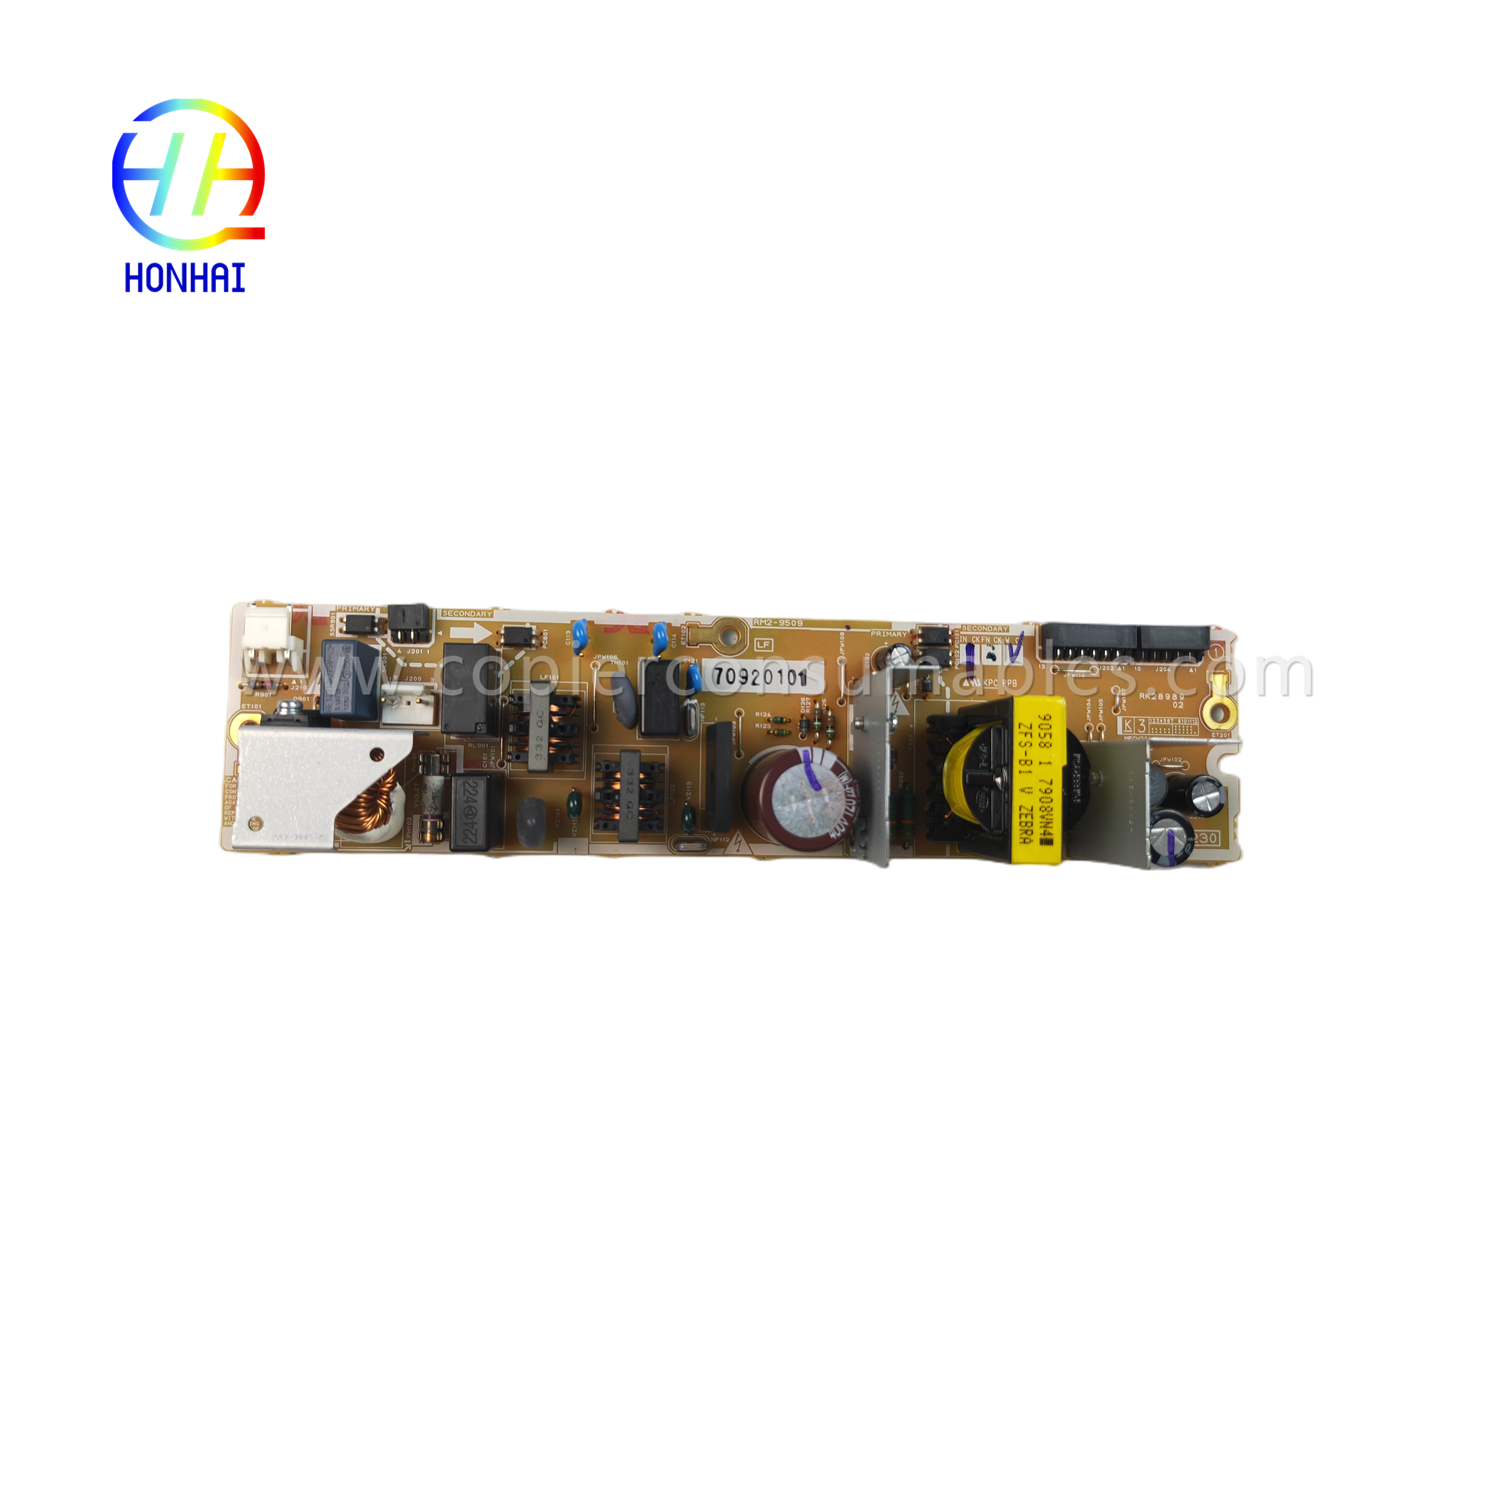 https://www.copierconsumables.com/power-supply-220v-for-hp-color-laserjet-pro-mfp-m283fdw-rm2-2428-product/